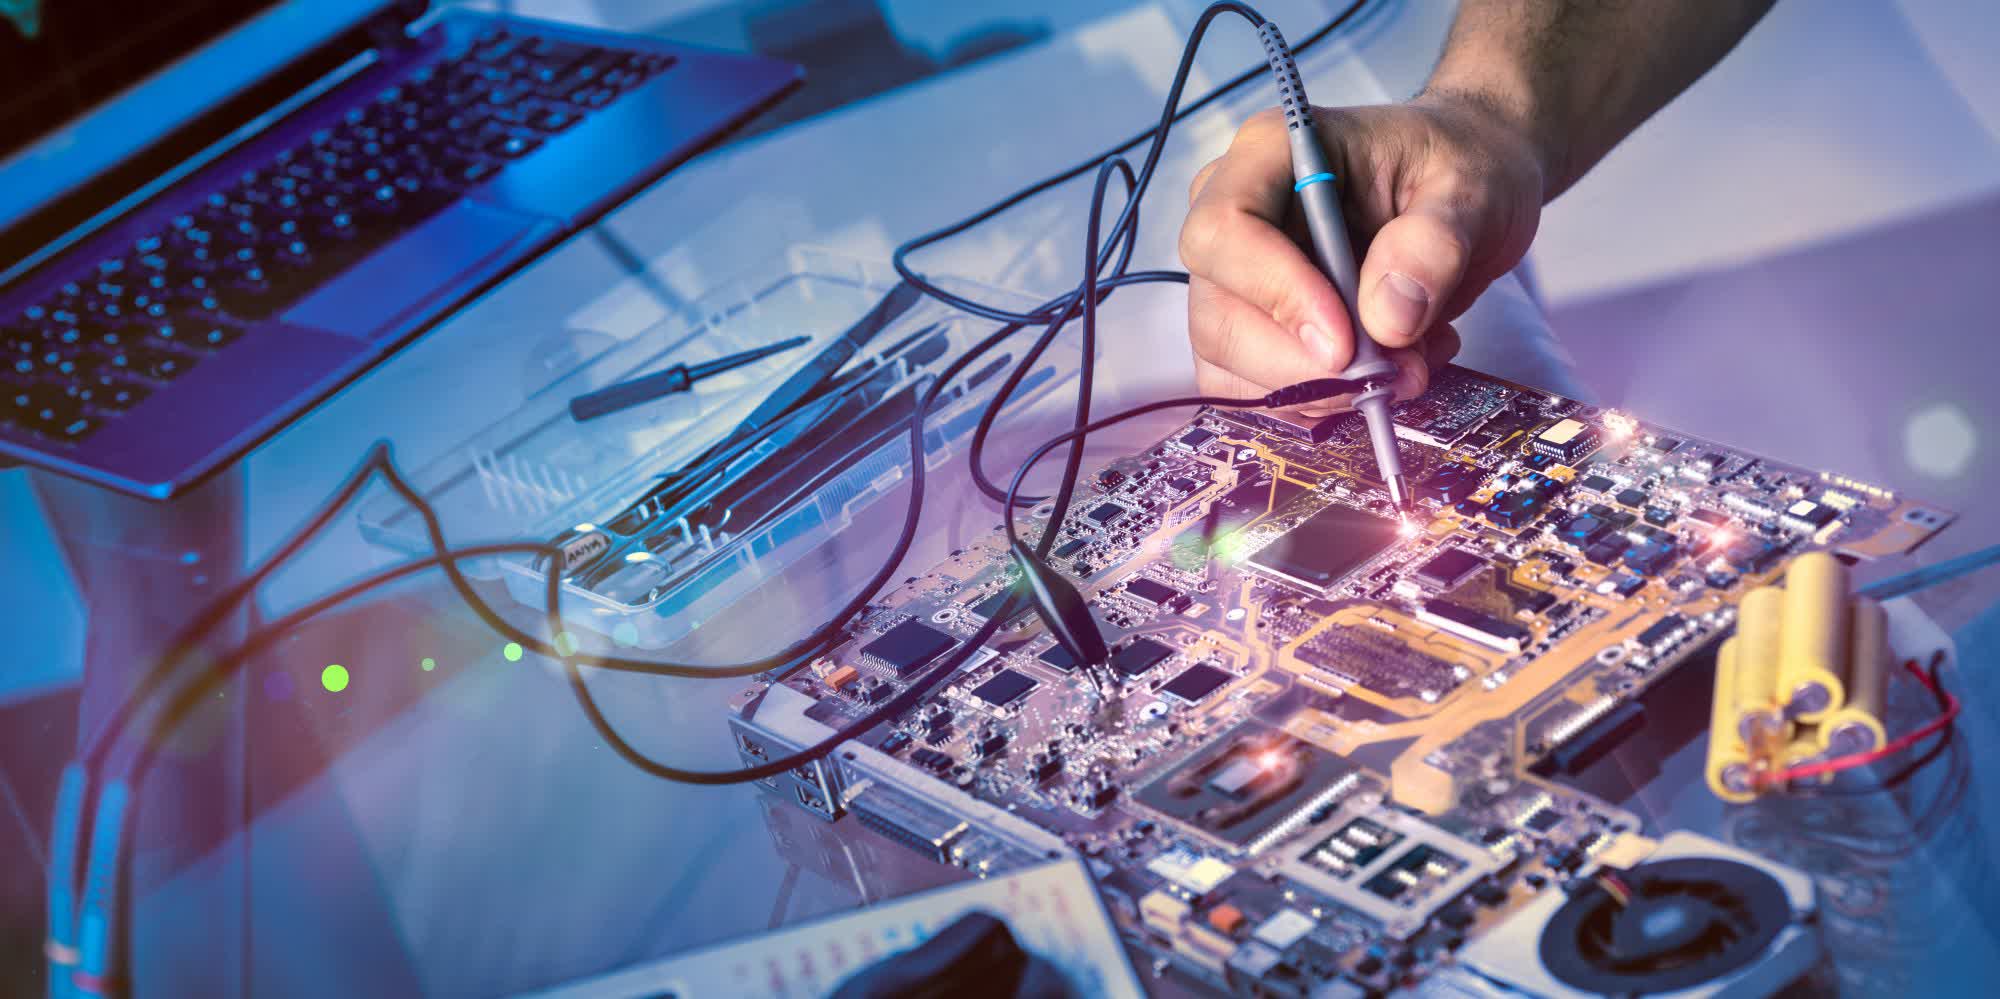 Get essential training on electrical engineering with this 13-course certification bundle